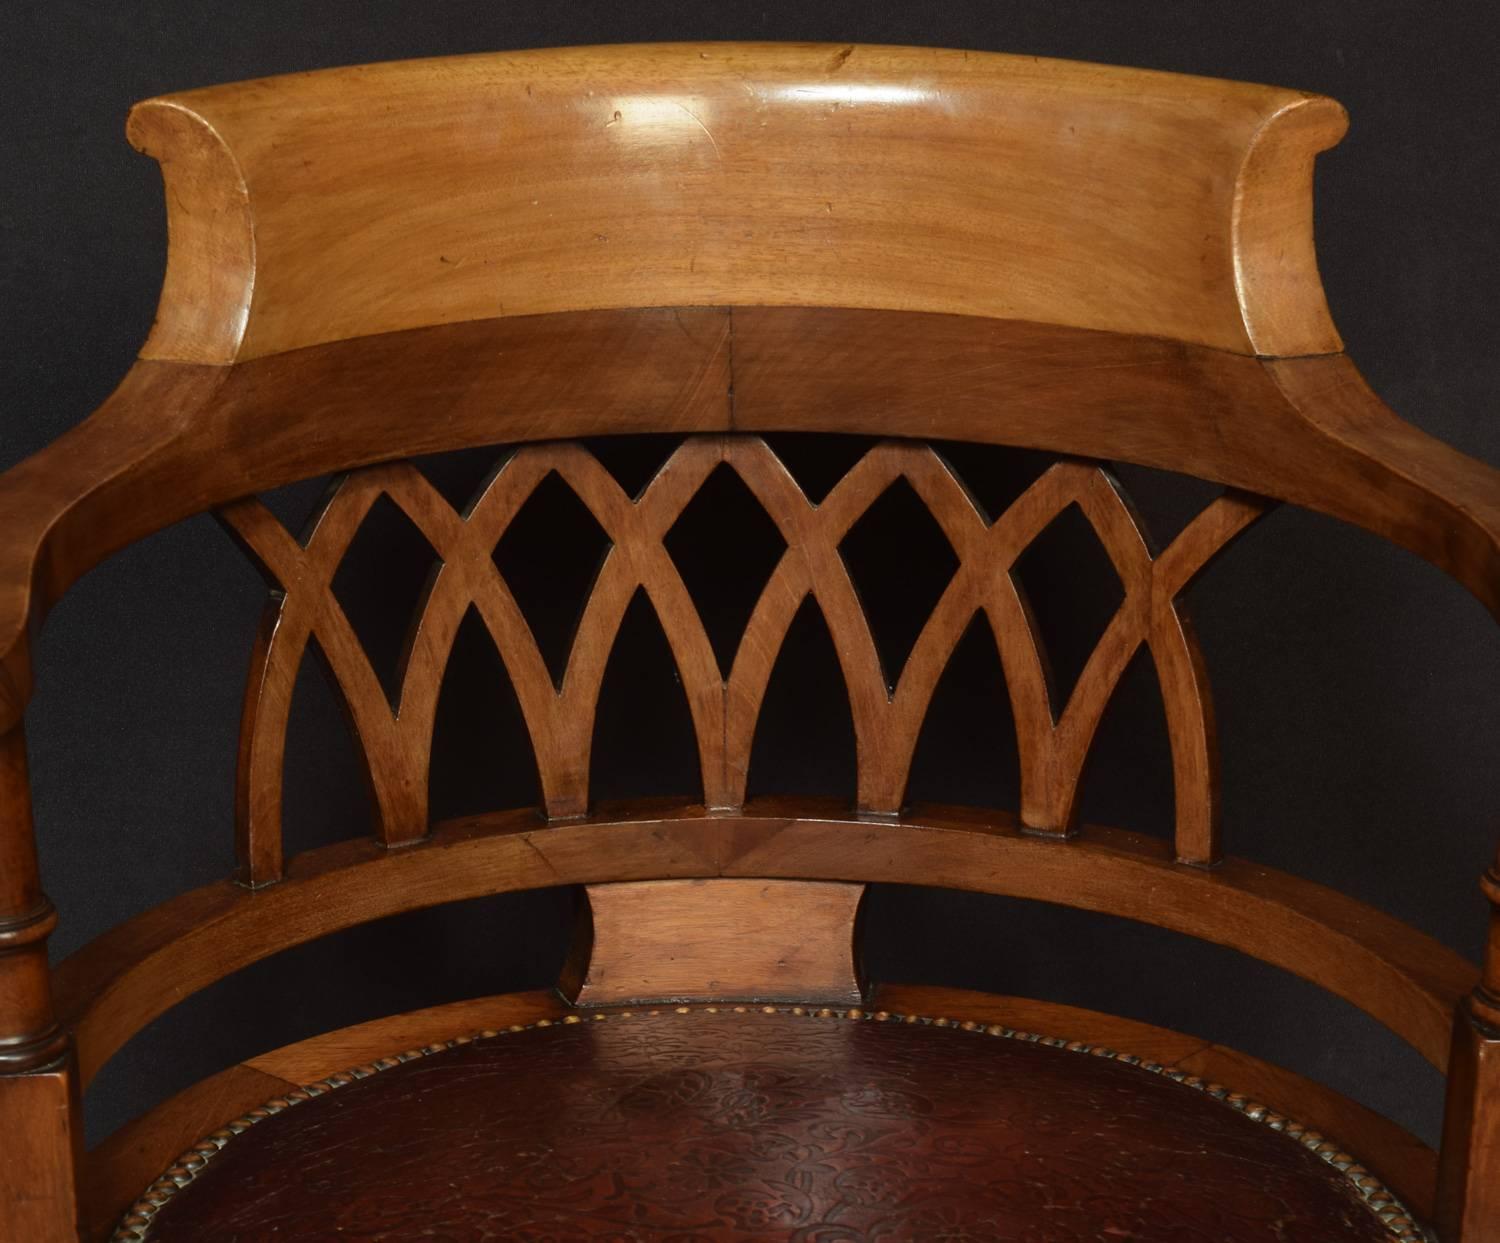 Late 19th century walnut revolving office chair with pierced back above circular tooled leather upholstered seat. Raised up on four fine cabriole legs terminating in ceramic castors.
Dimensions
Height 32.5 inches height to seat 20.5 inches
Width